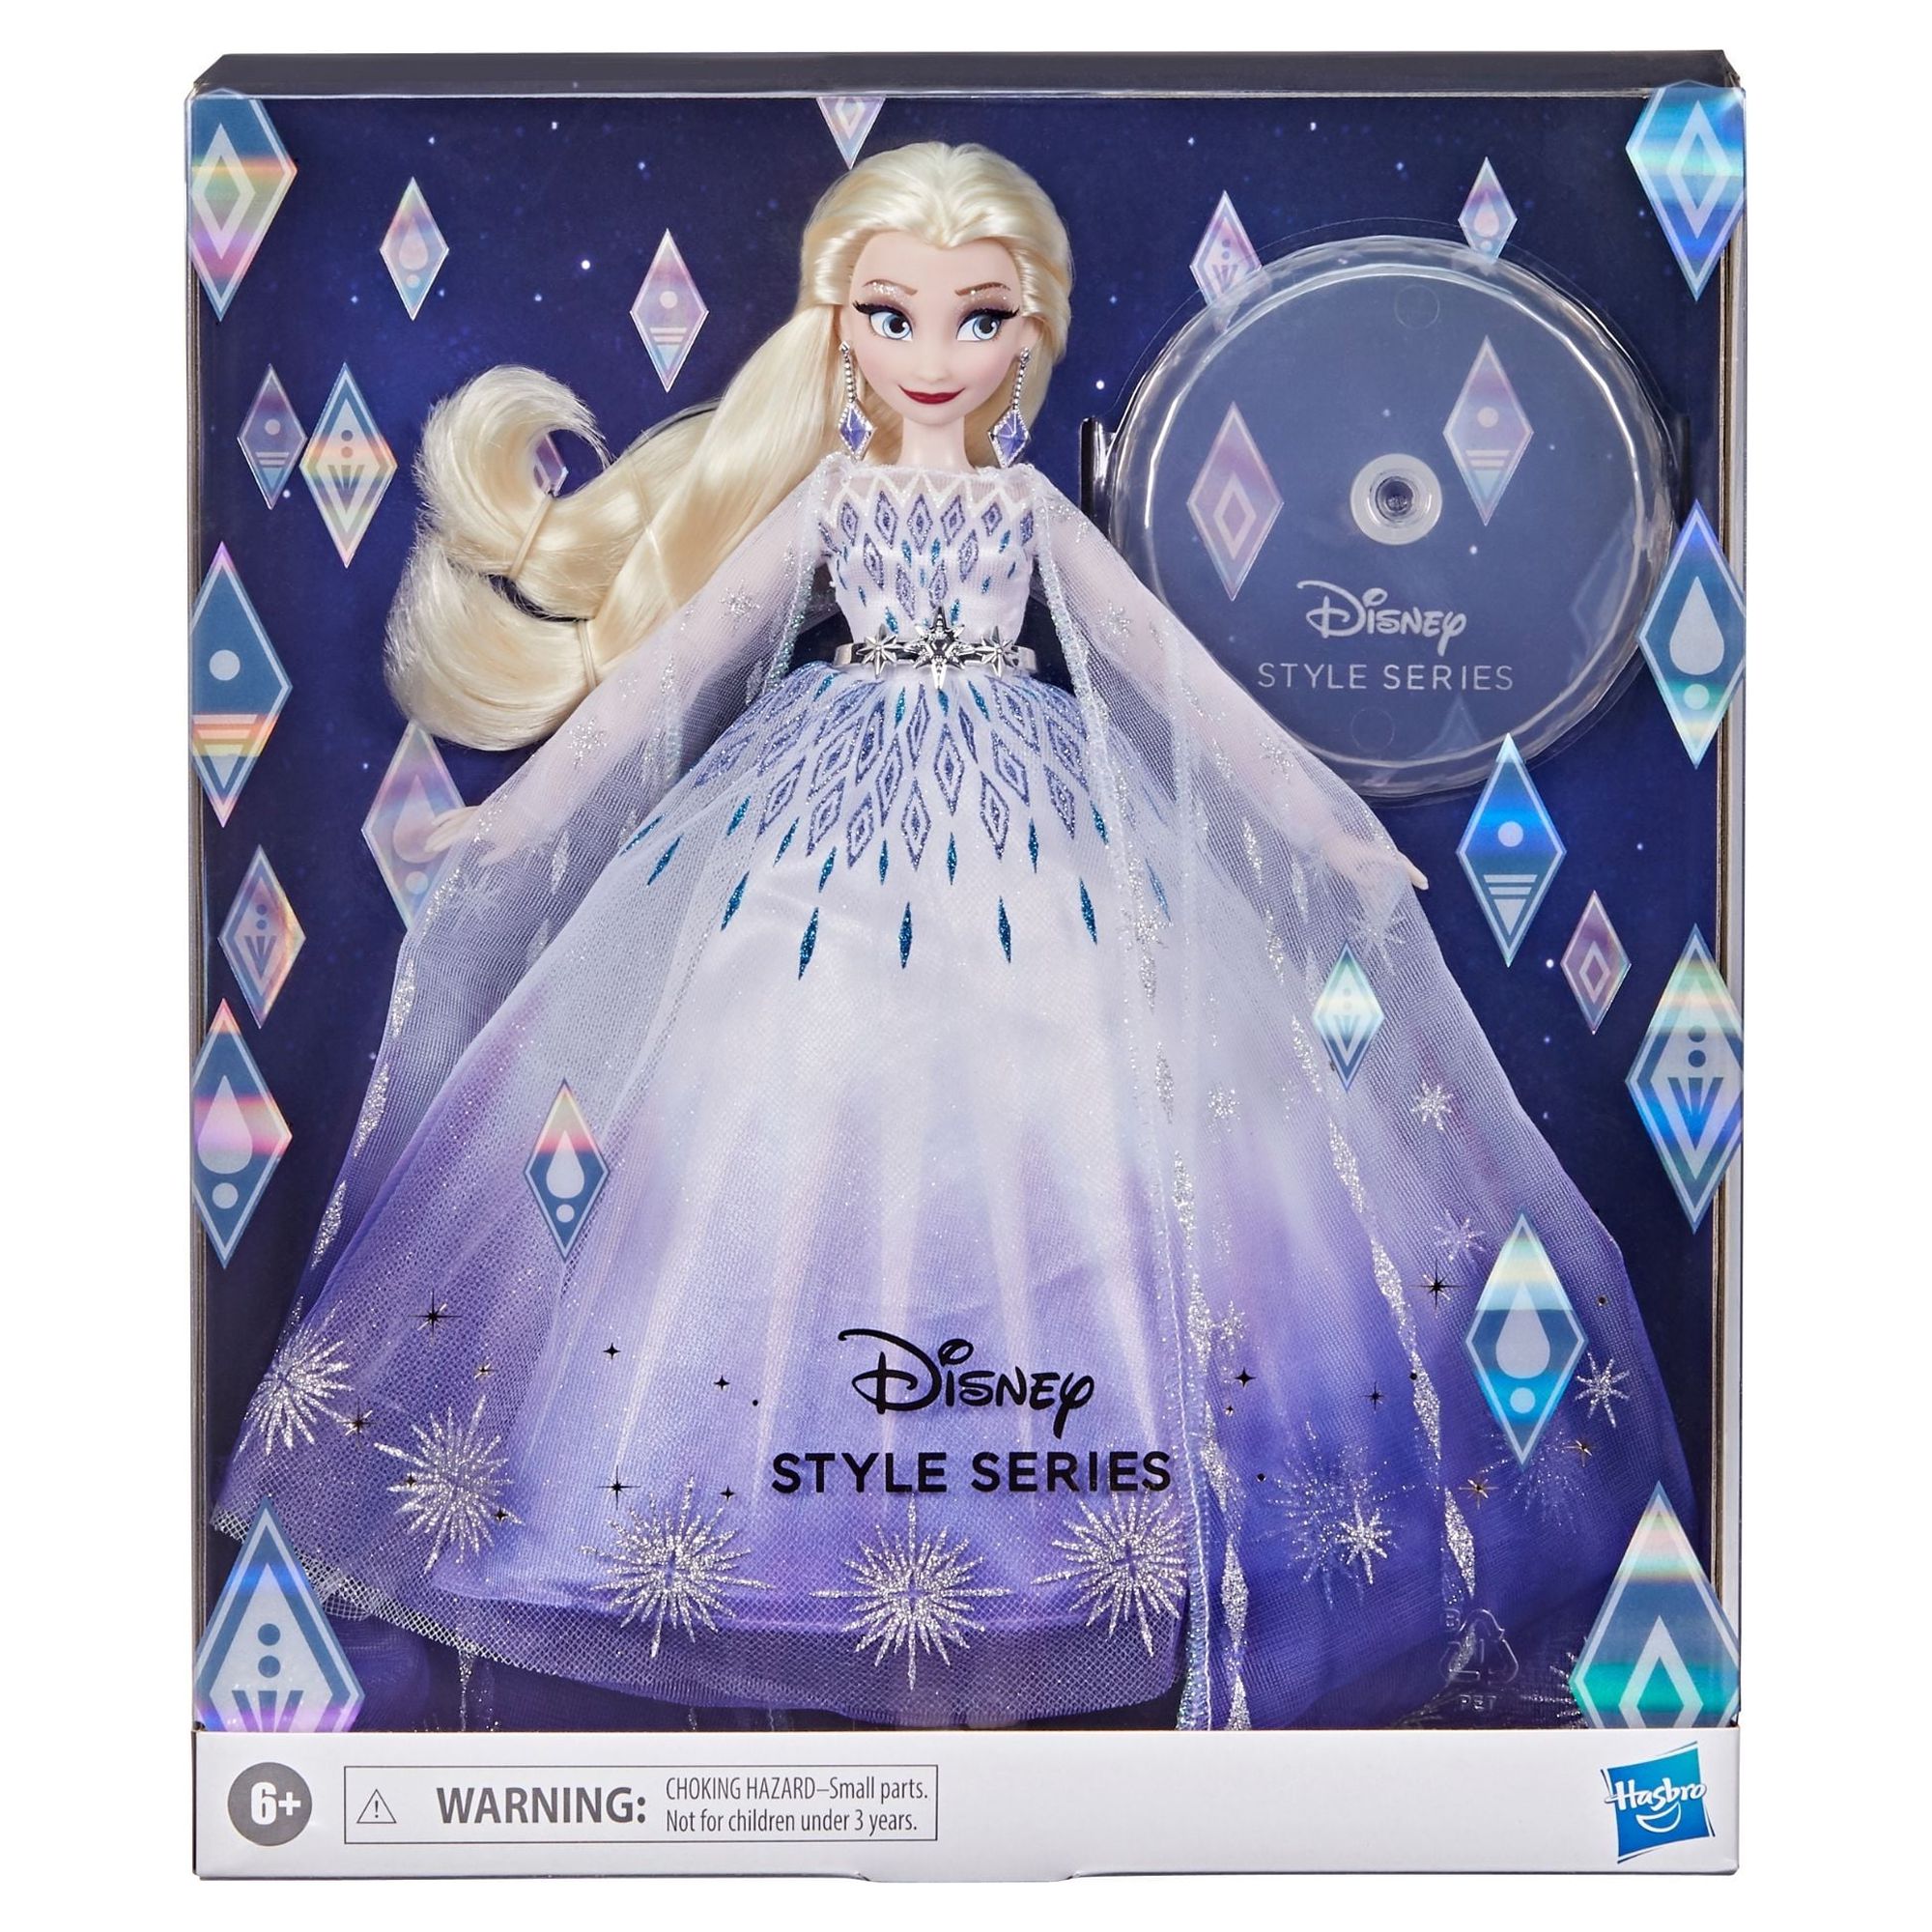 Disney Princess Style Series Holiday Elsa Doll, Fashion Doll Accessories - image 2 of 7